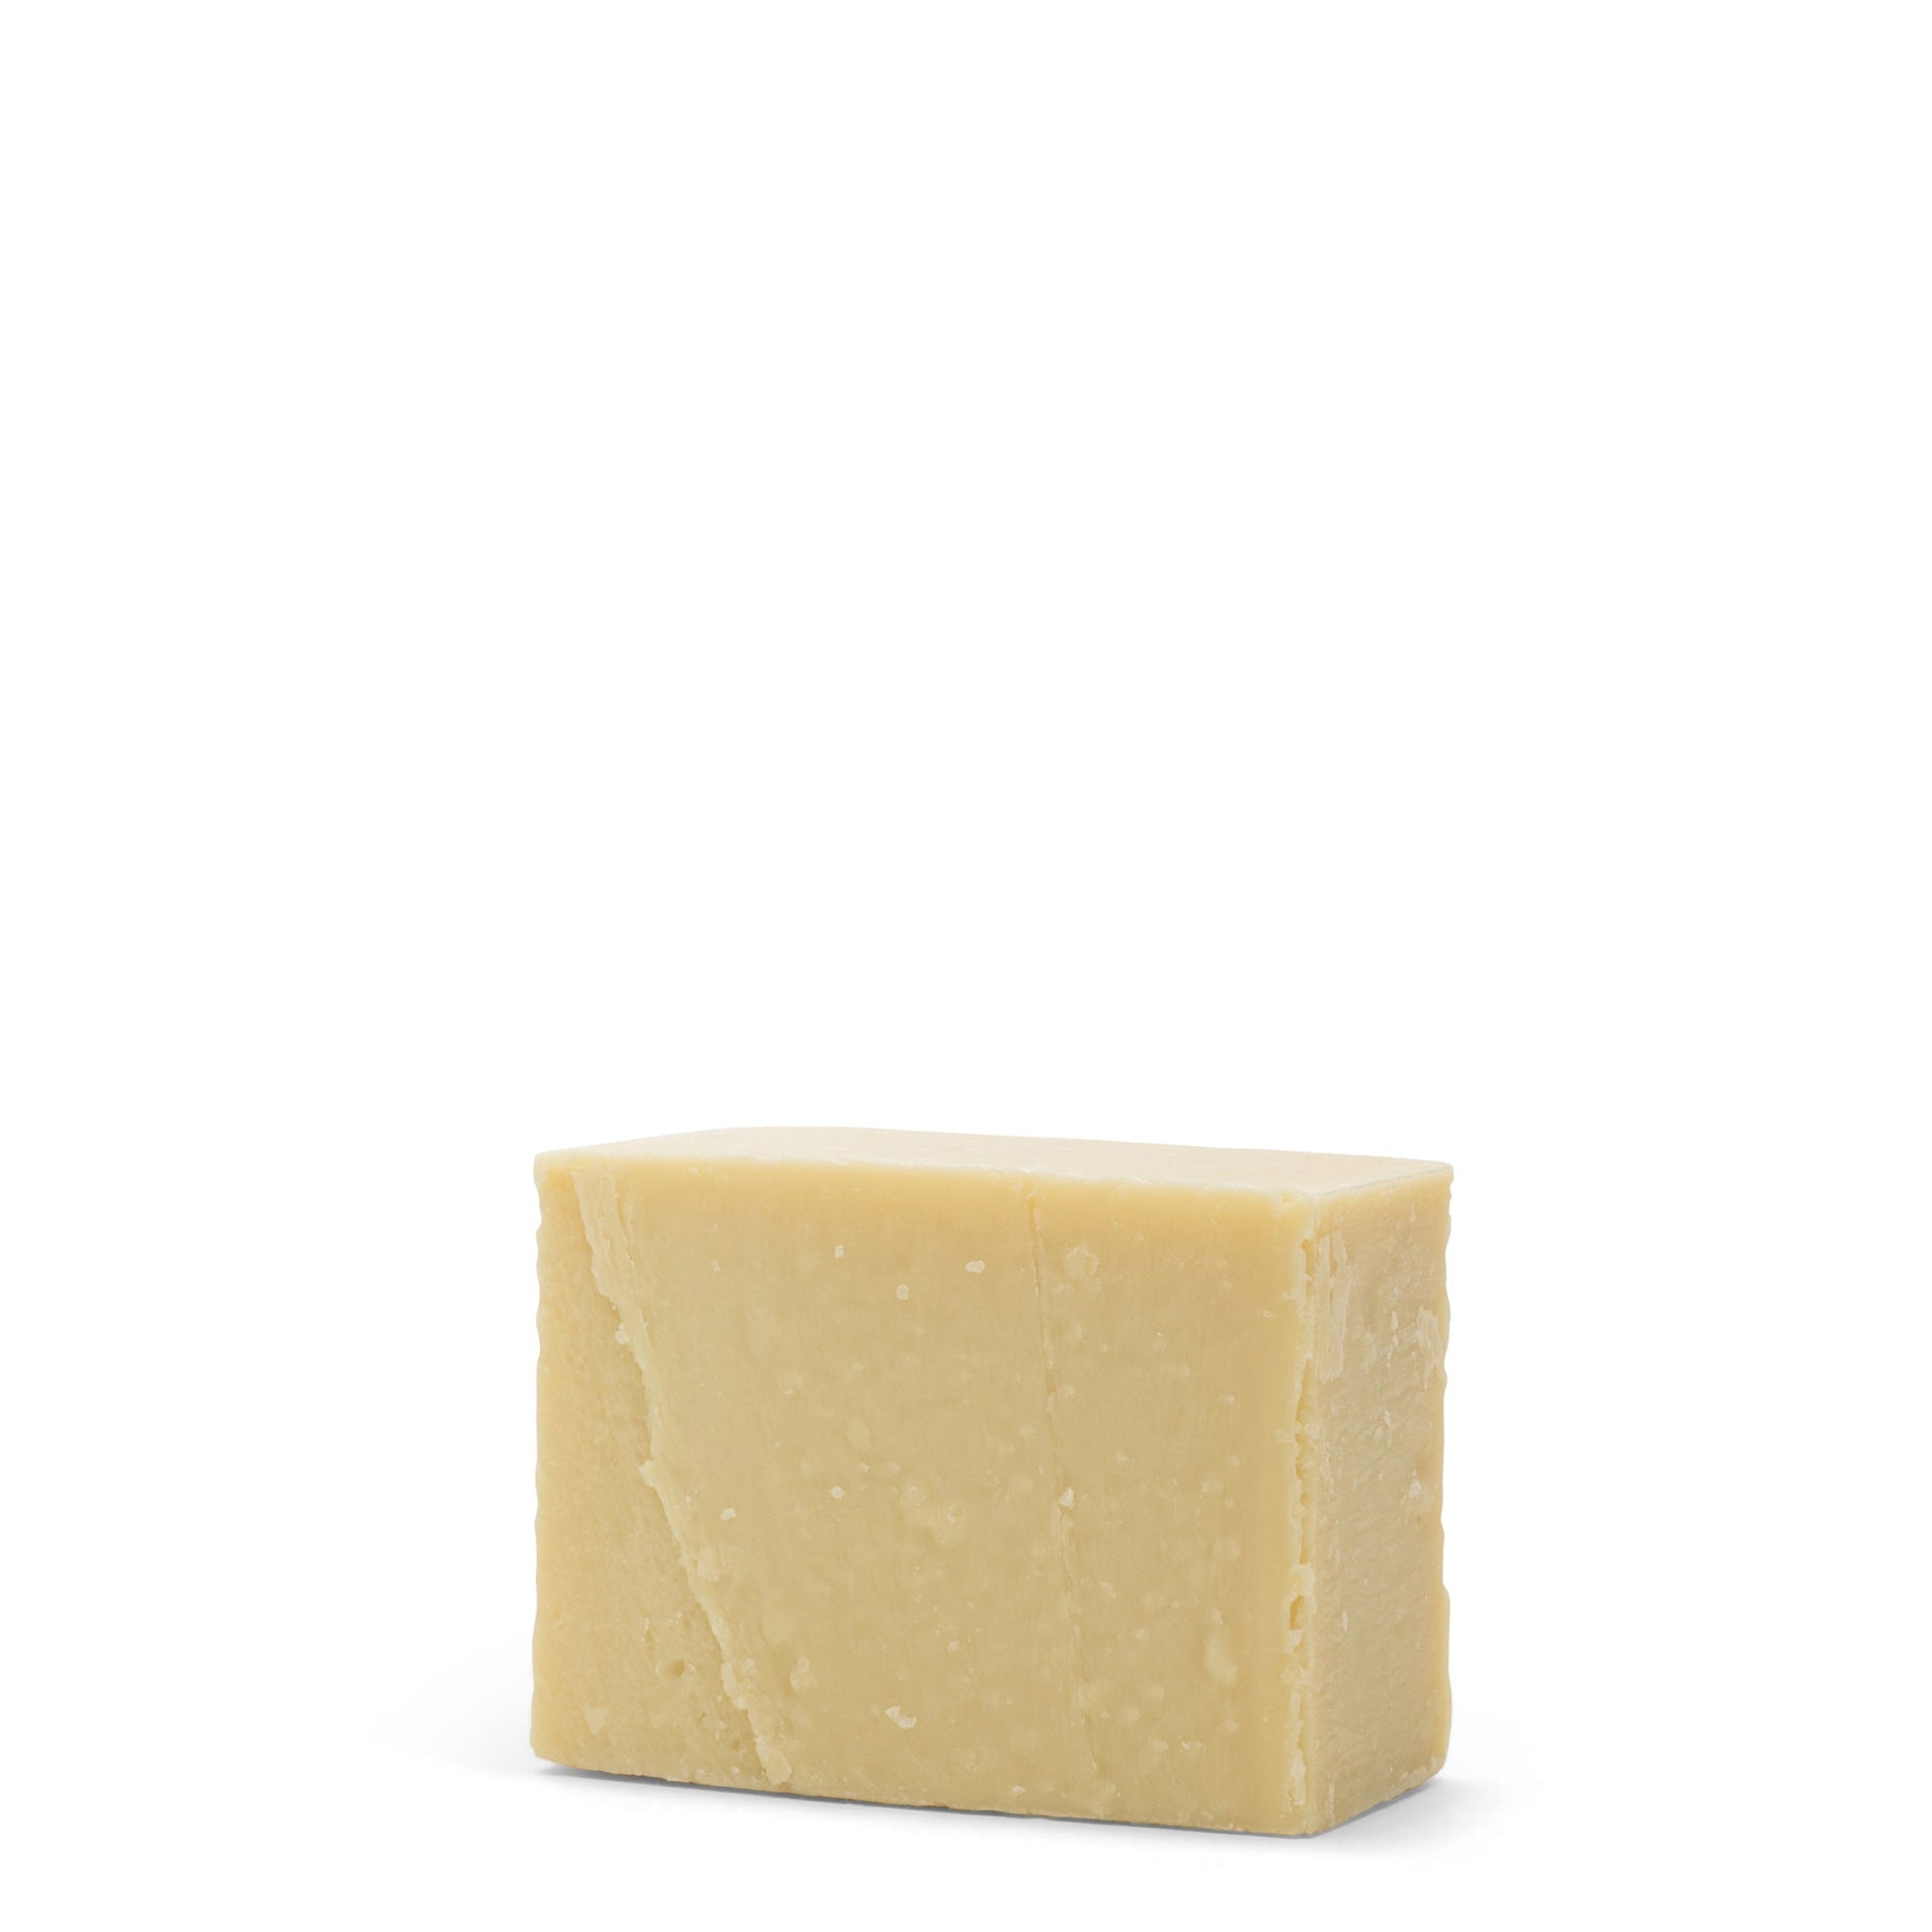 A rectangular soap sits unwrapped on a white background. It is creamy yellow in colour.